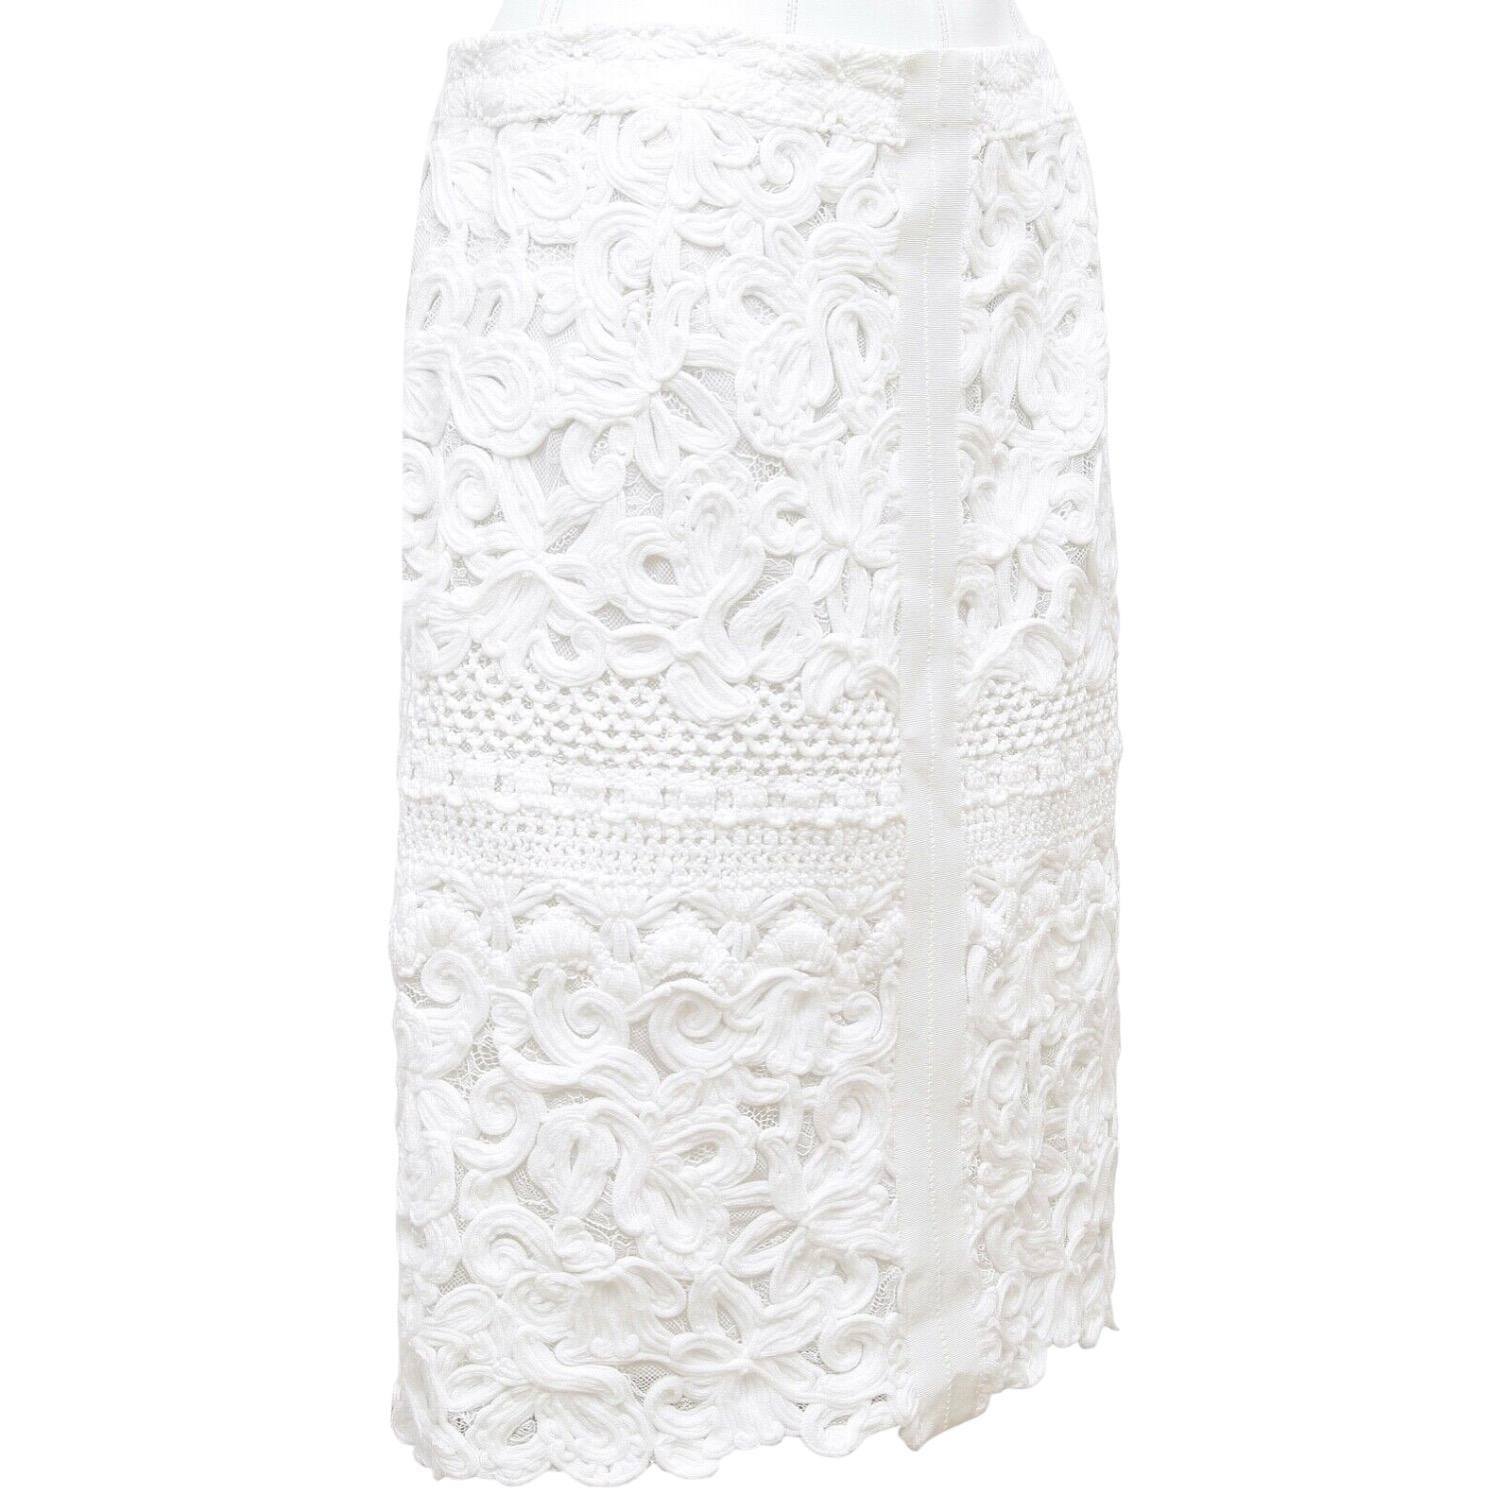 GUARANTEED AUTHENTIC ERMANNO SCERVINO WHITE FLORAL LACE SKIRT

Retail excluding sales taxes $1,665

Design:
- Medium weight viscose blend floral lace pencil skirt.
- Grosgrain down center front and back.
- Rear zipper closure.
- Lined.

Fabric: 65%